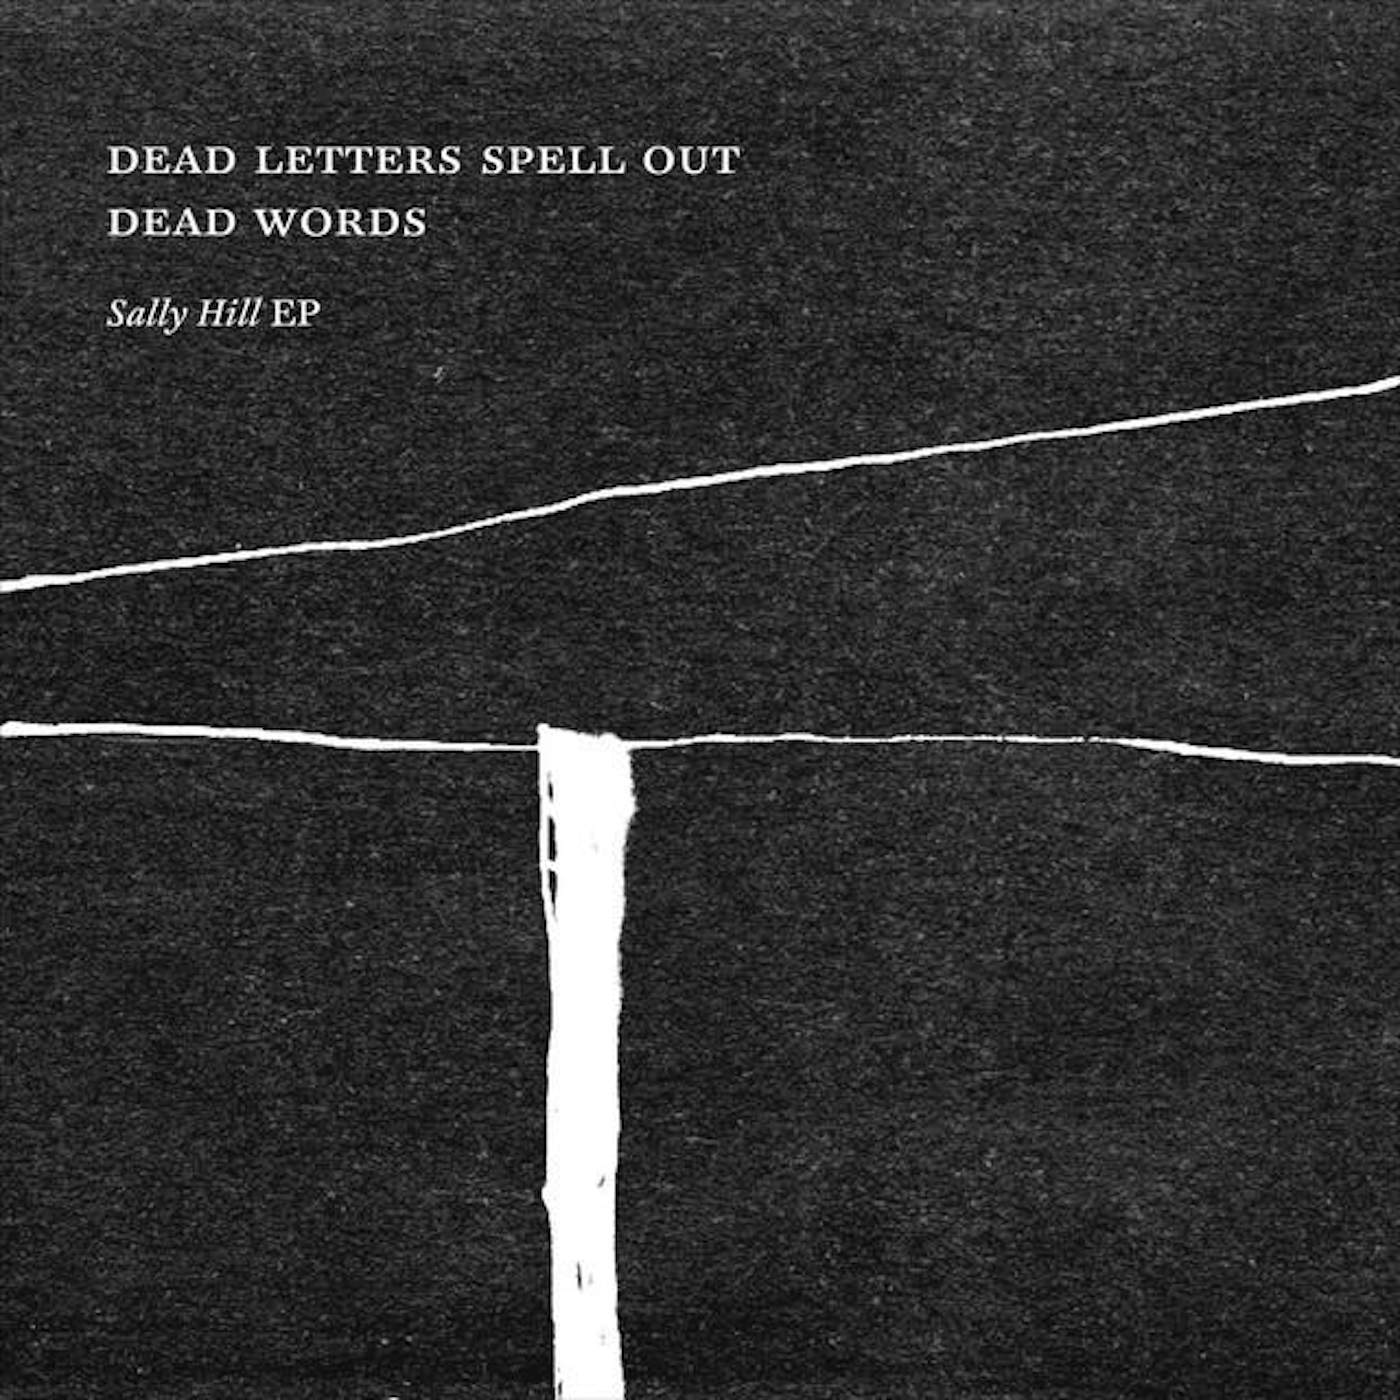 Dead Letters Spell Out Dead Words